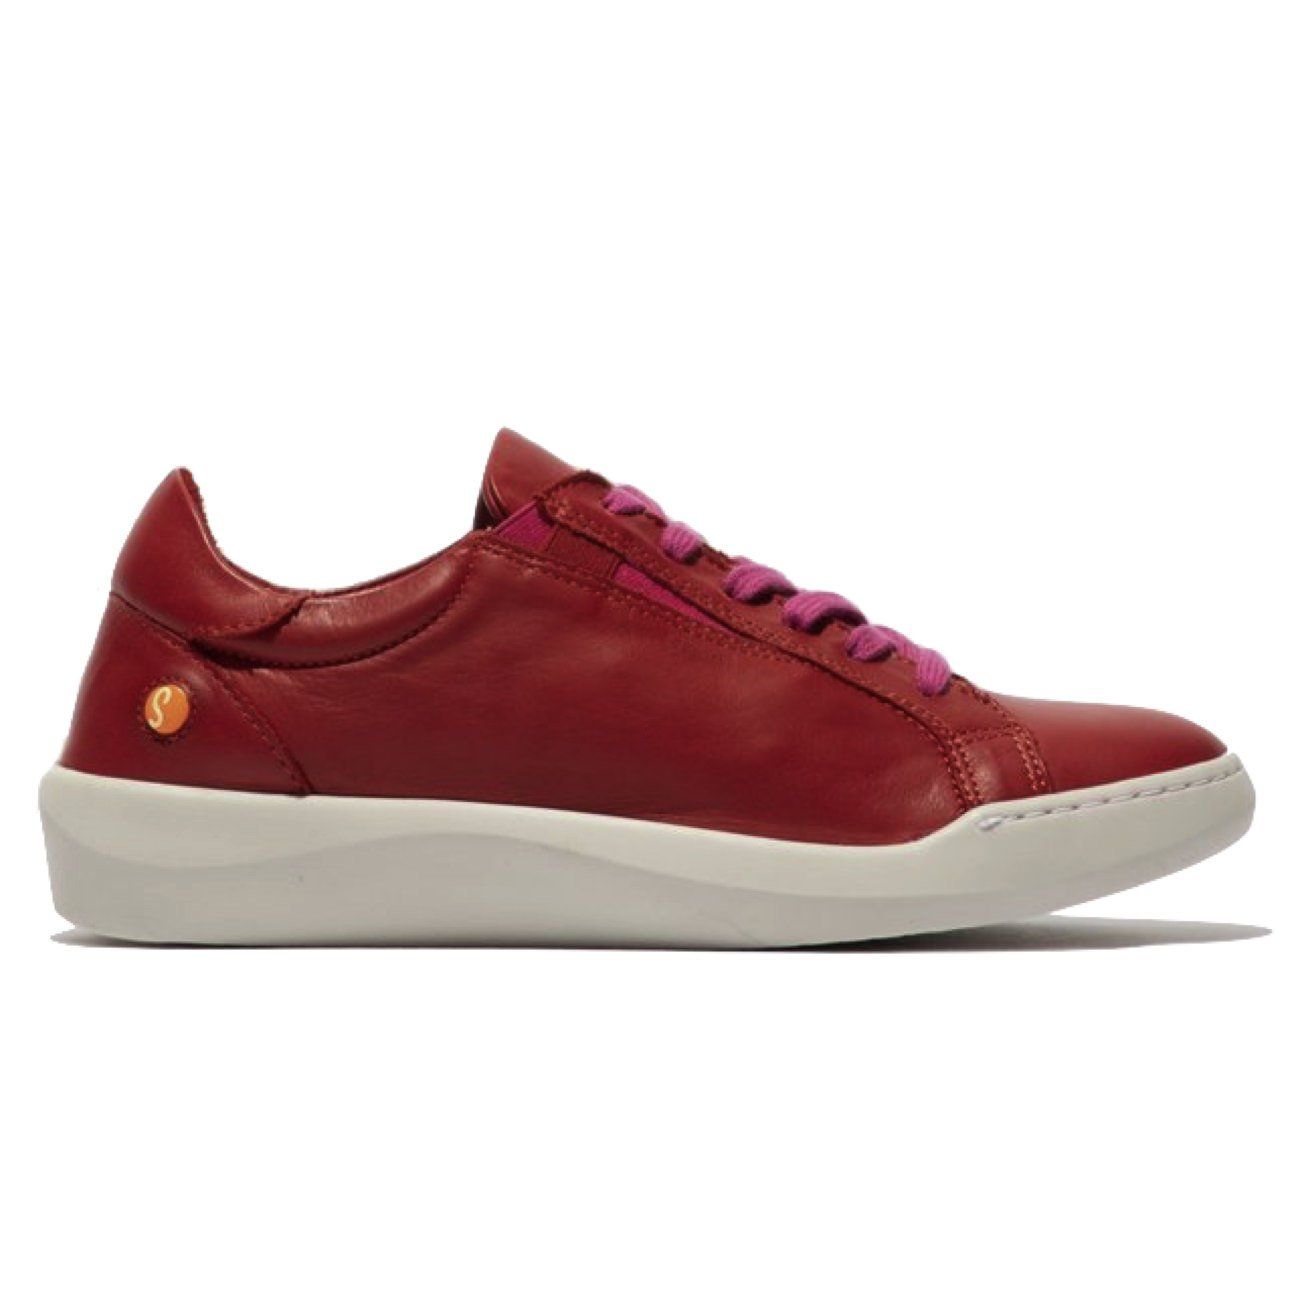 Softinos, Belv639, Laceup Shoe, Supple Leather, Cherry Red Shoes Softinos Cherry Red 36 